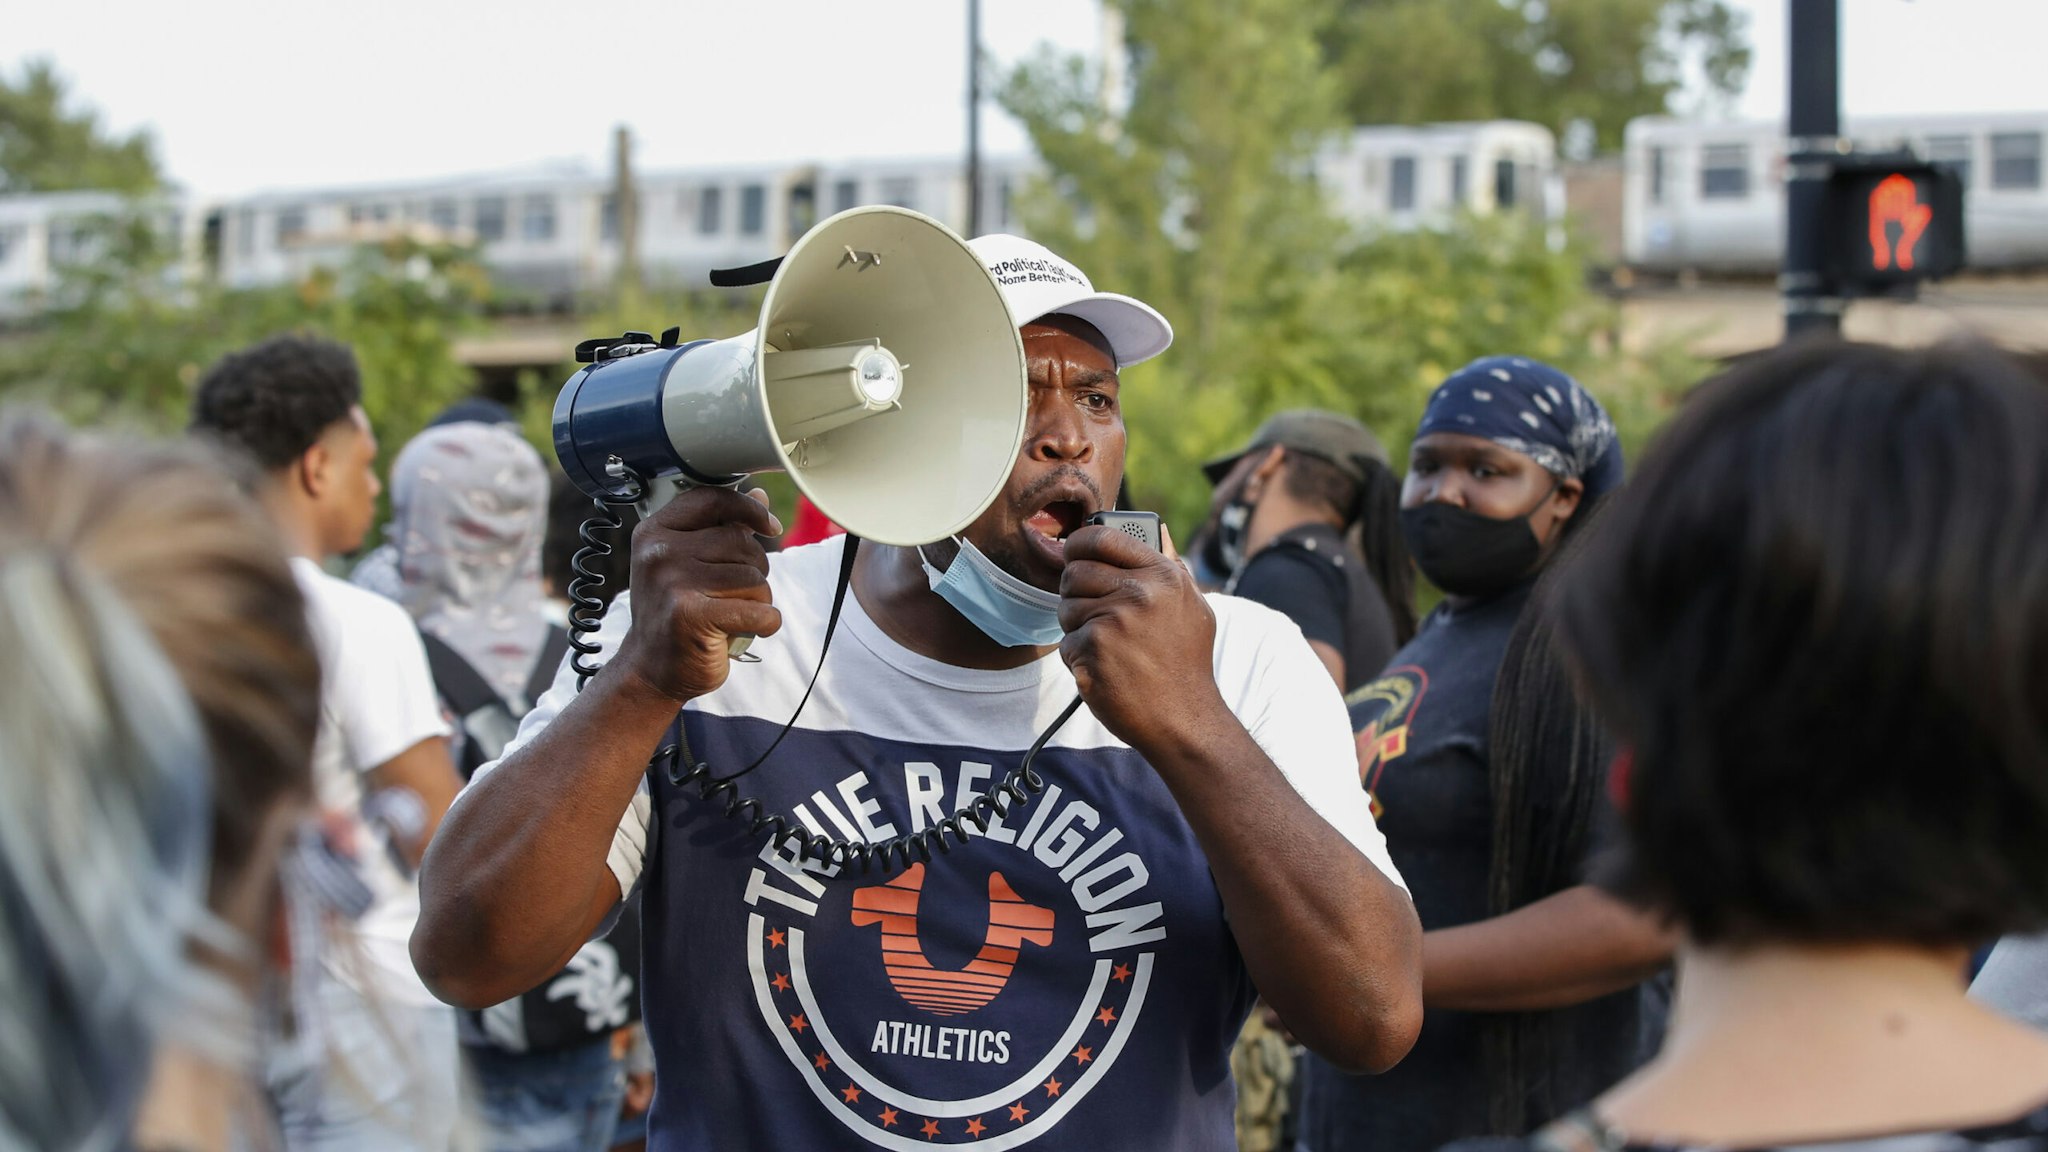 A man shouts into a megaphone against the presence of protesters during a rally against Chicago Police violence in the Englewood neighborhood of Chicago, Illinois, on August 11, 2020. (Photo by KAMIL KRZACZYNSKI / AFP) (Photo by KAMIL KRZACZYNSKI/AFP via Getty Images)